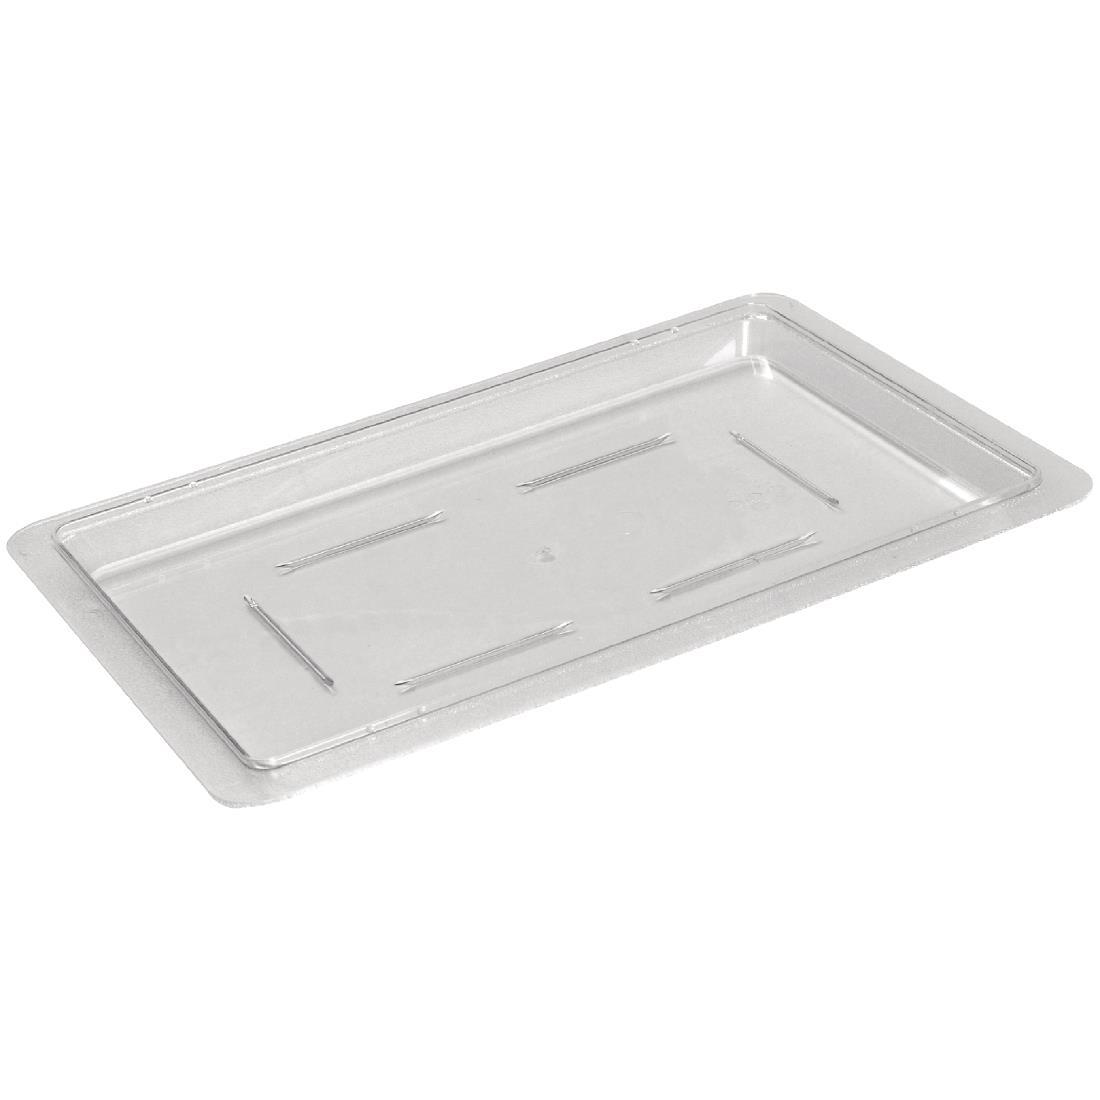 Vogue Polycarbonate Lid Small - CG988  - 1